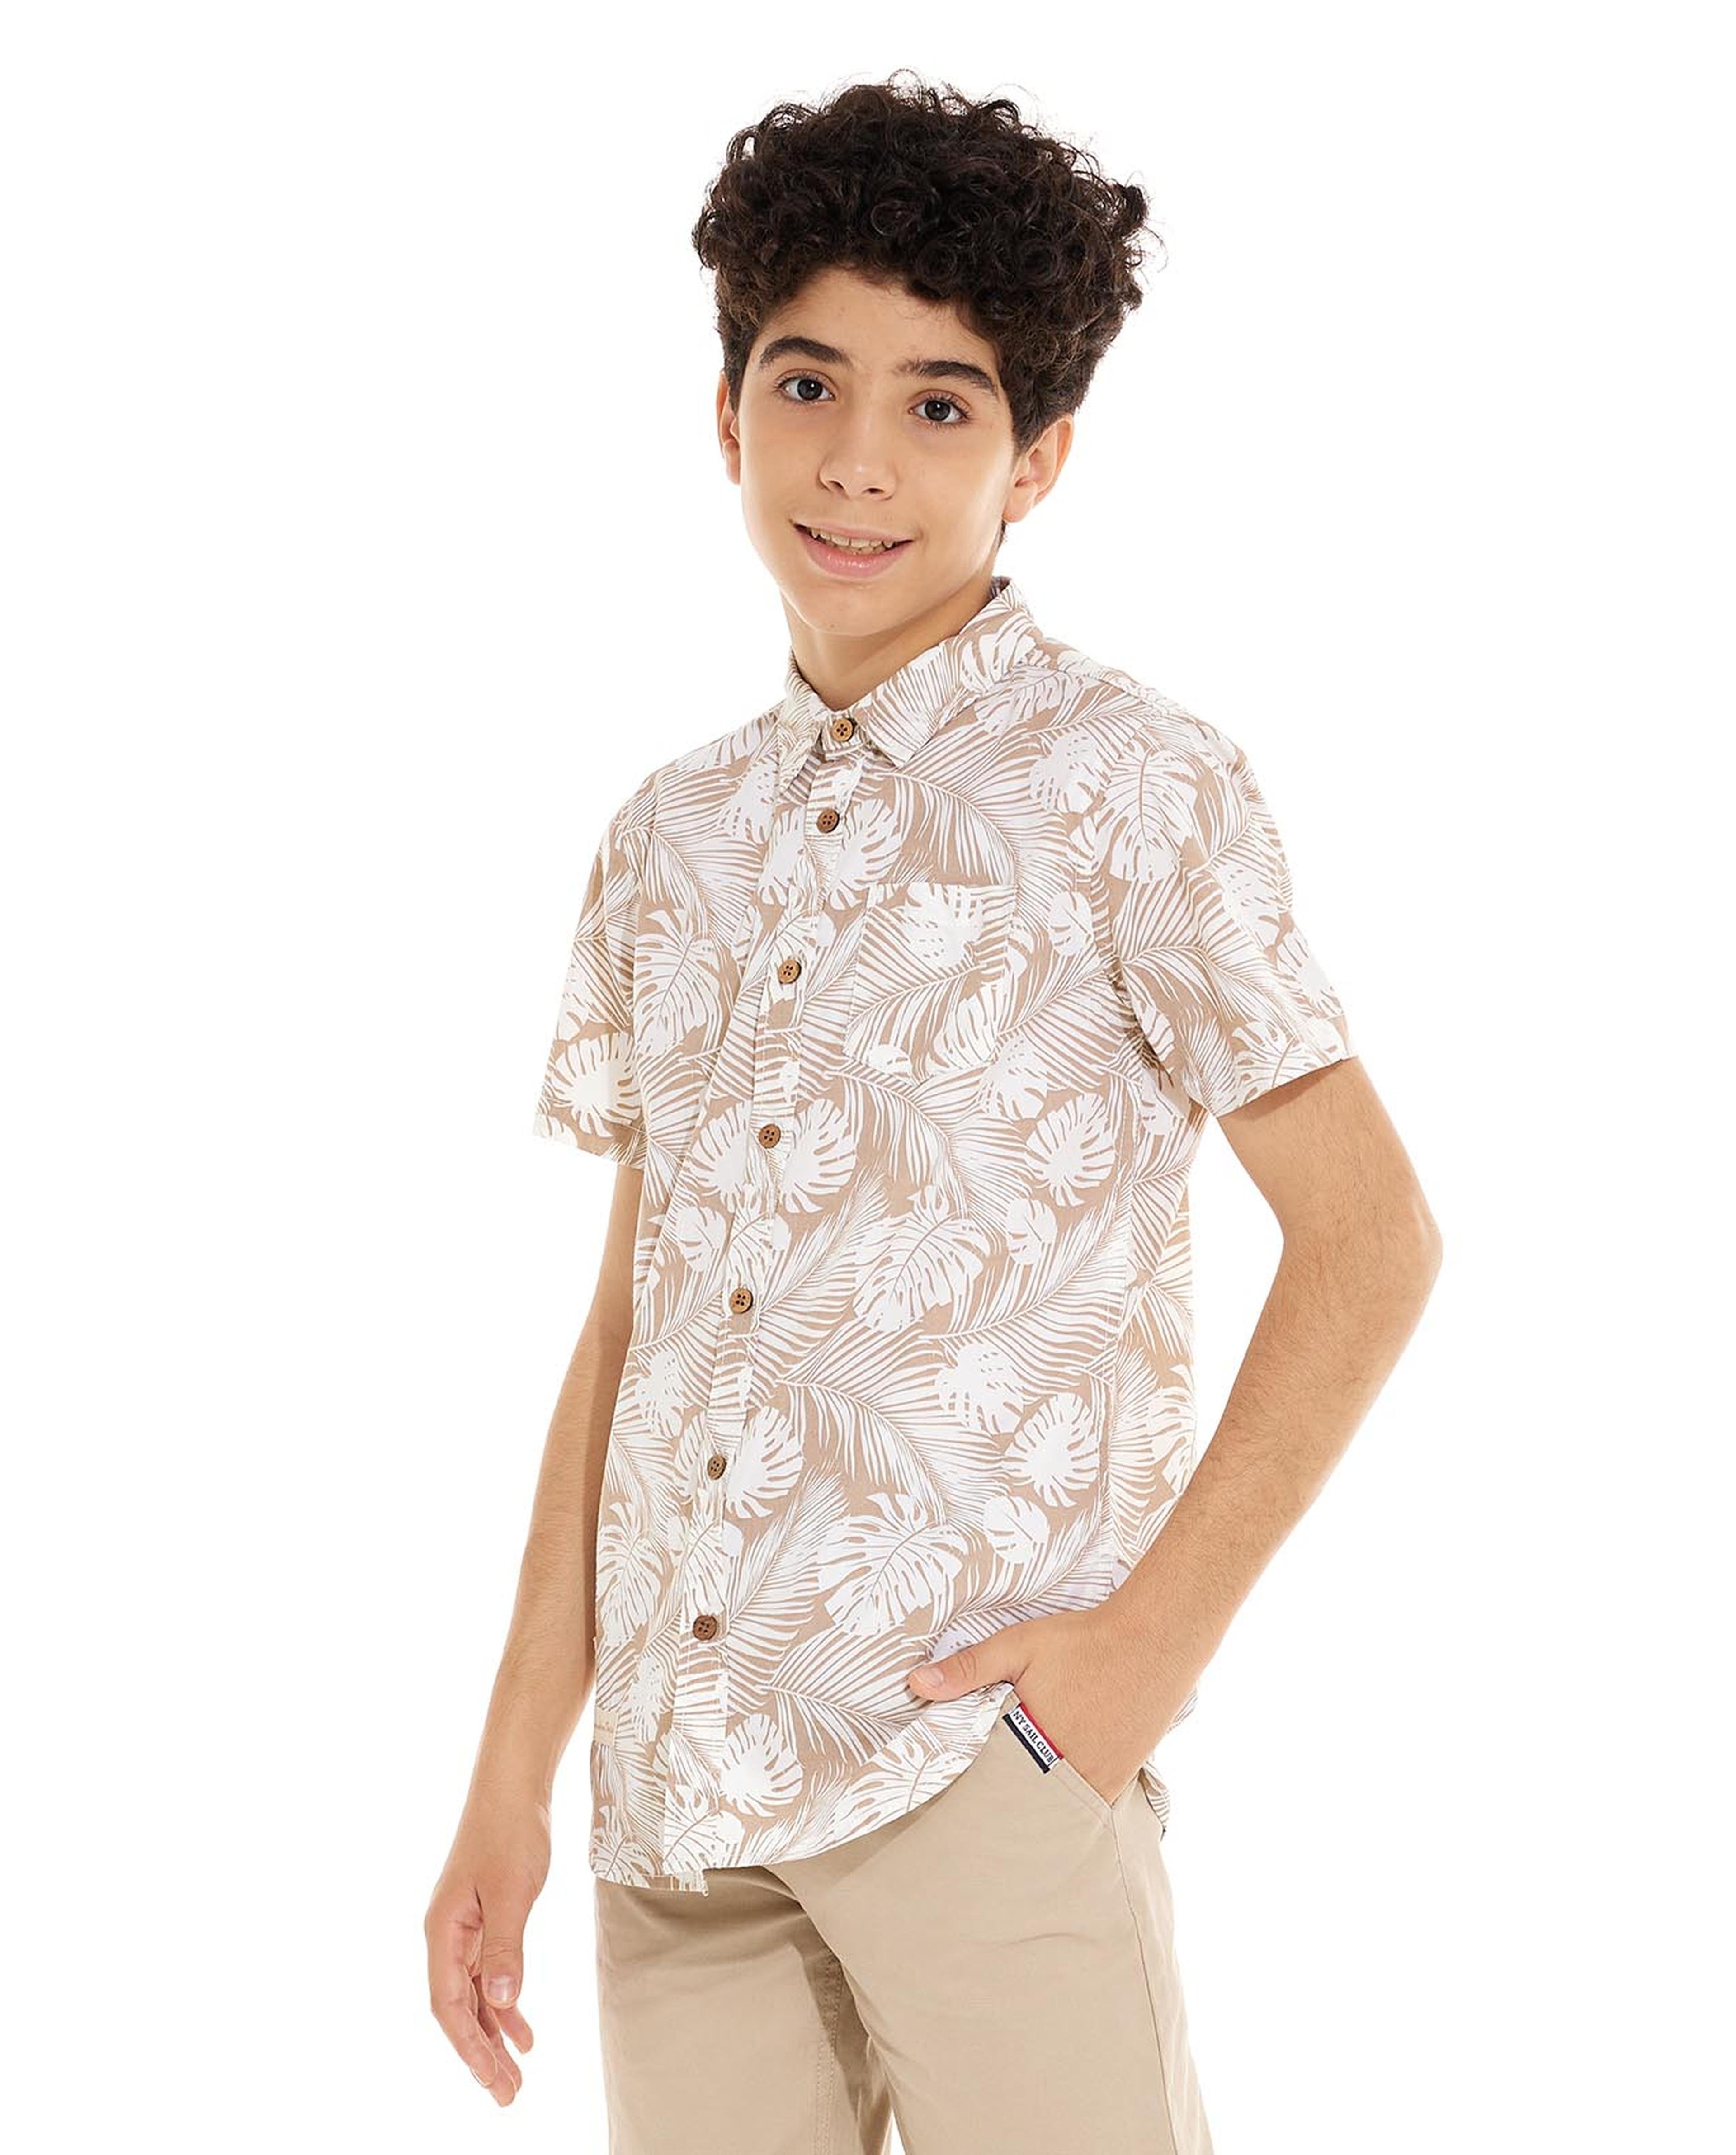 Patterned Shirt with Classic Collar and Short Sleeves